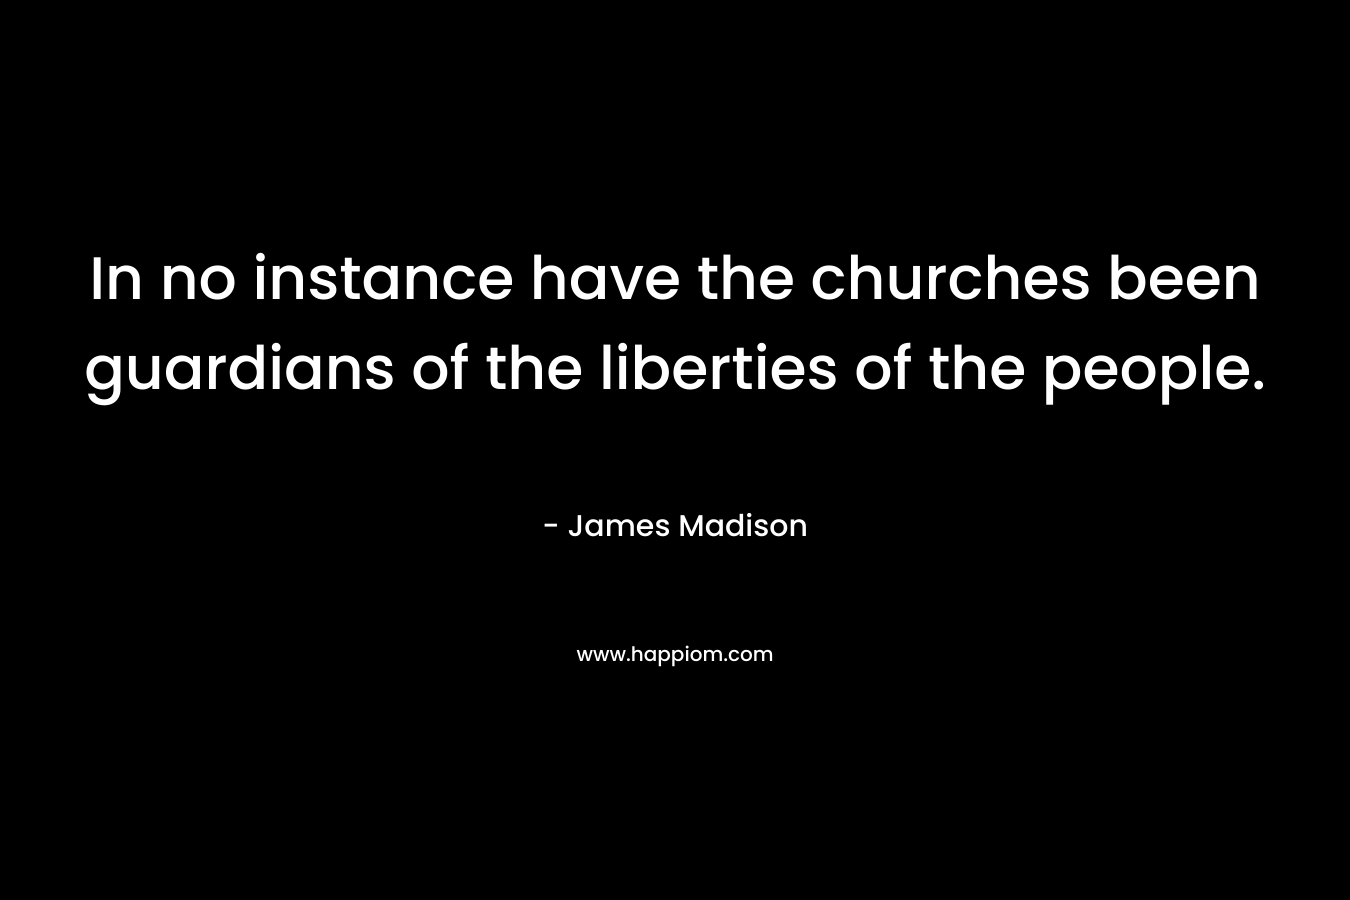 In no instance have the churches been guardians of the liberties of the people. – James Madison